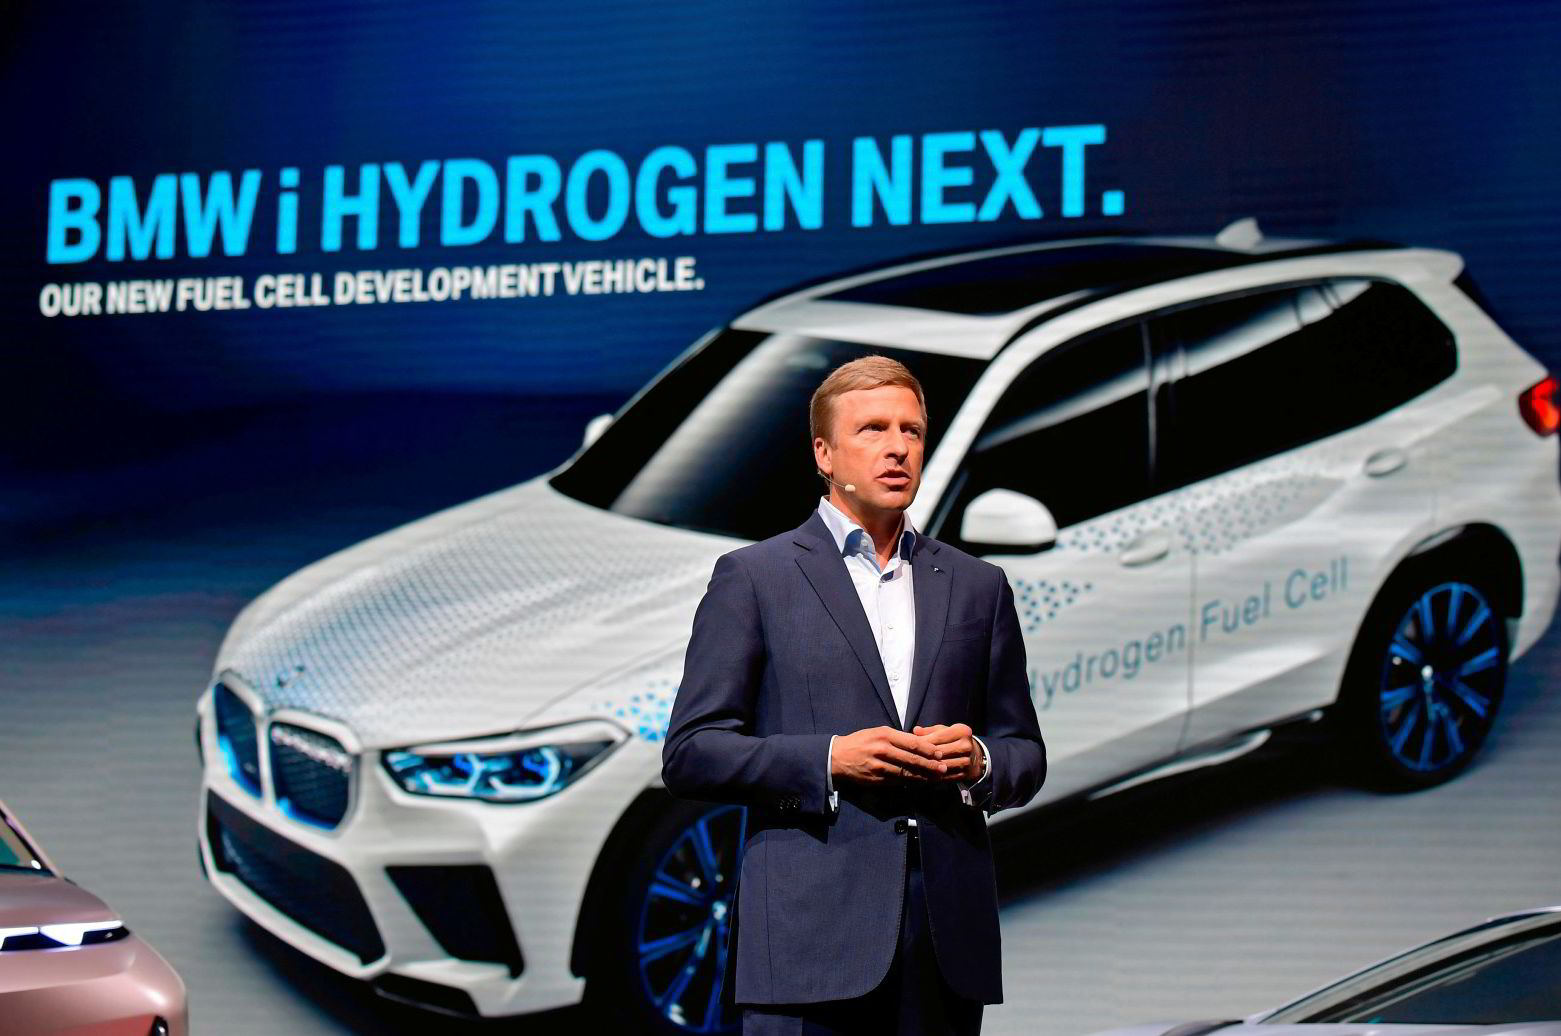 Why get a hydrogen car? it will be 'the hippest thing drive', says boss | Hydrogen news intelligence